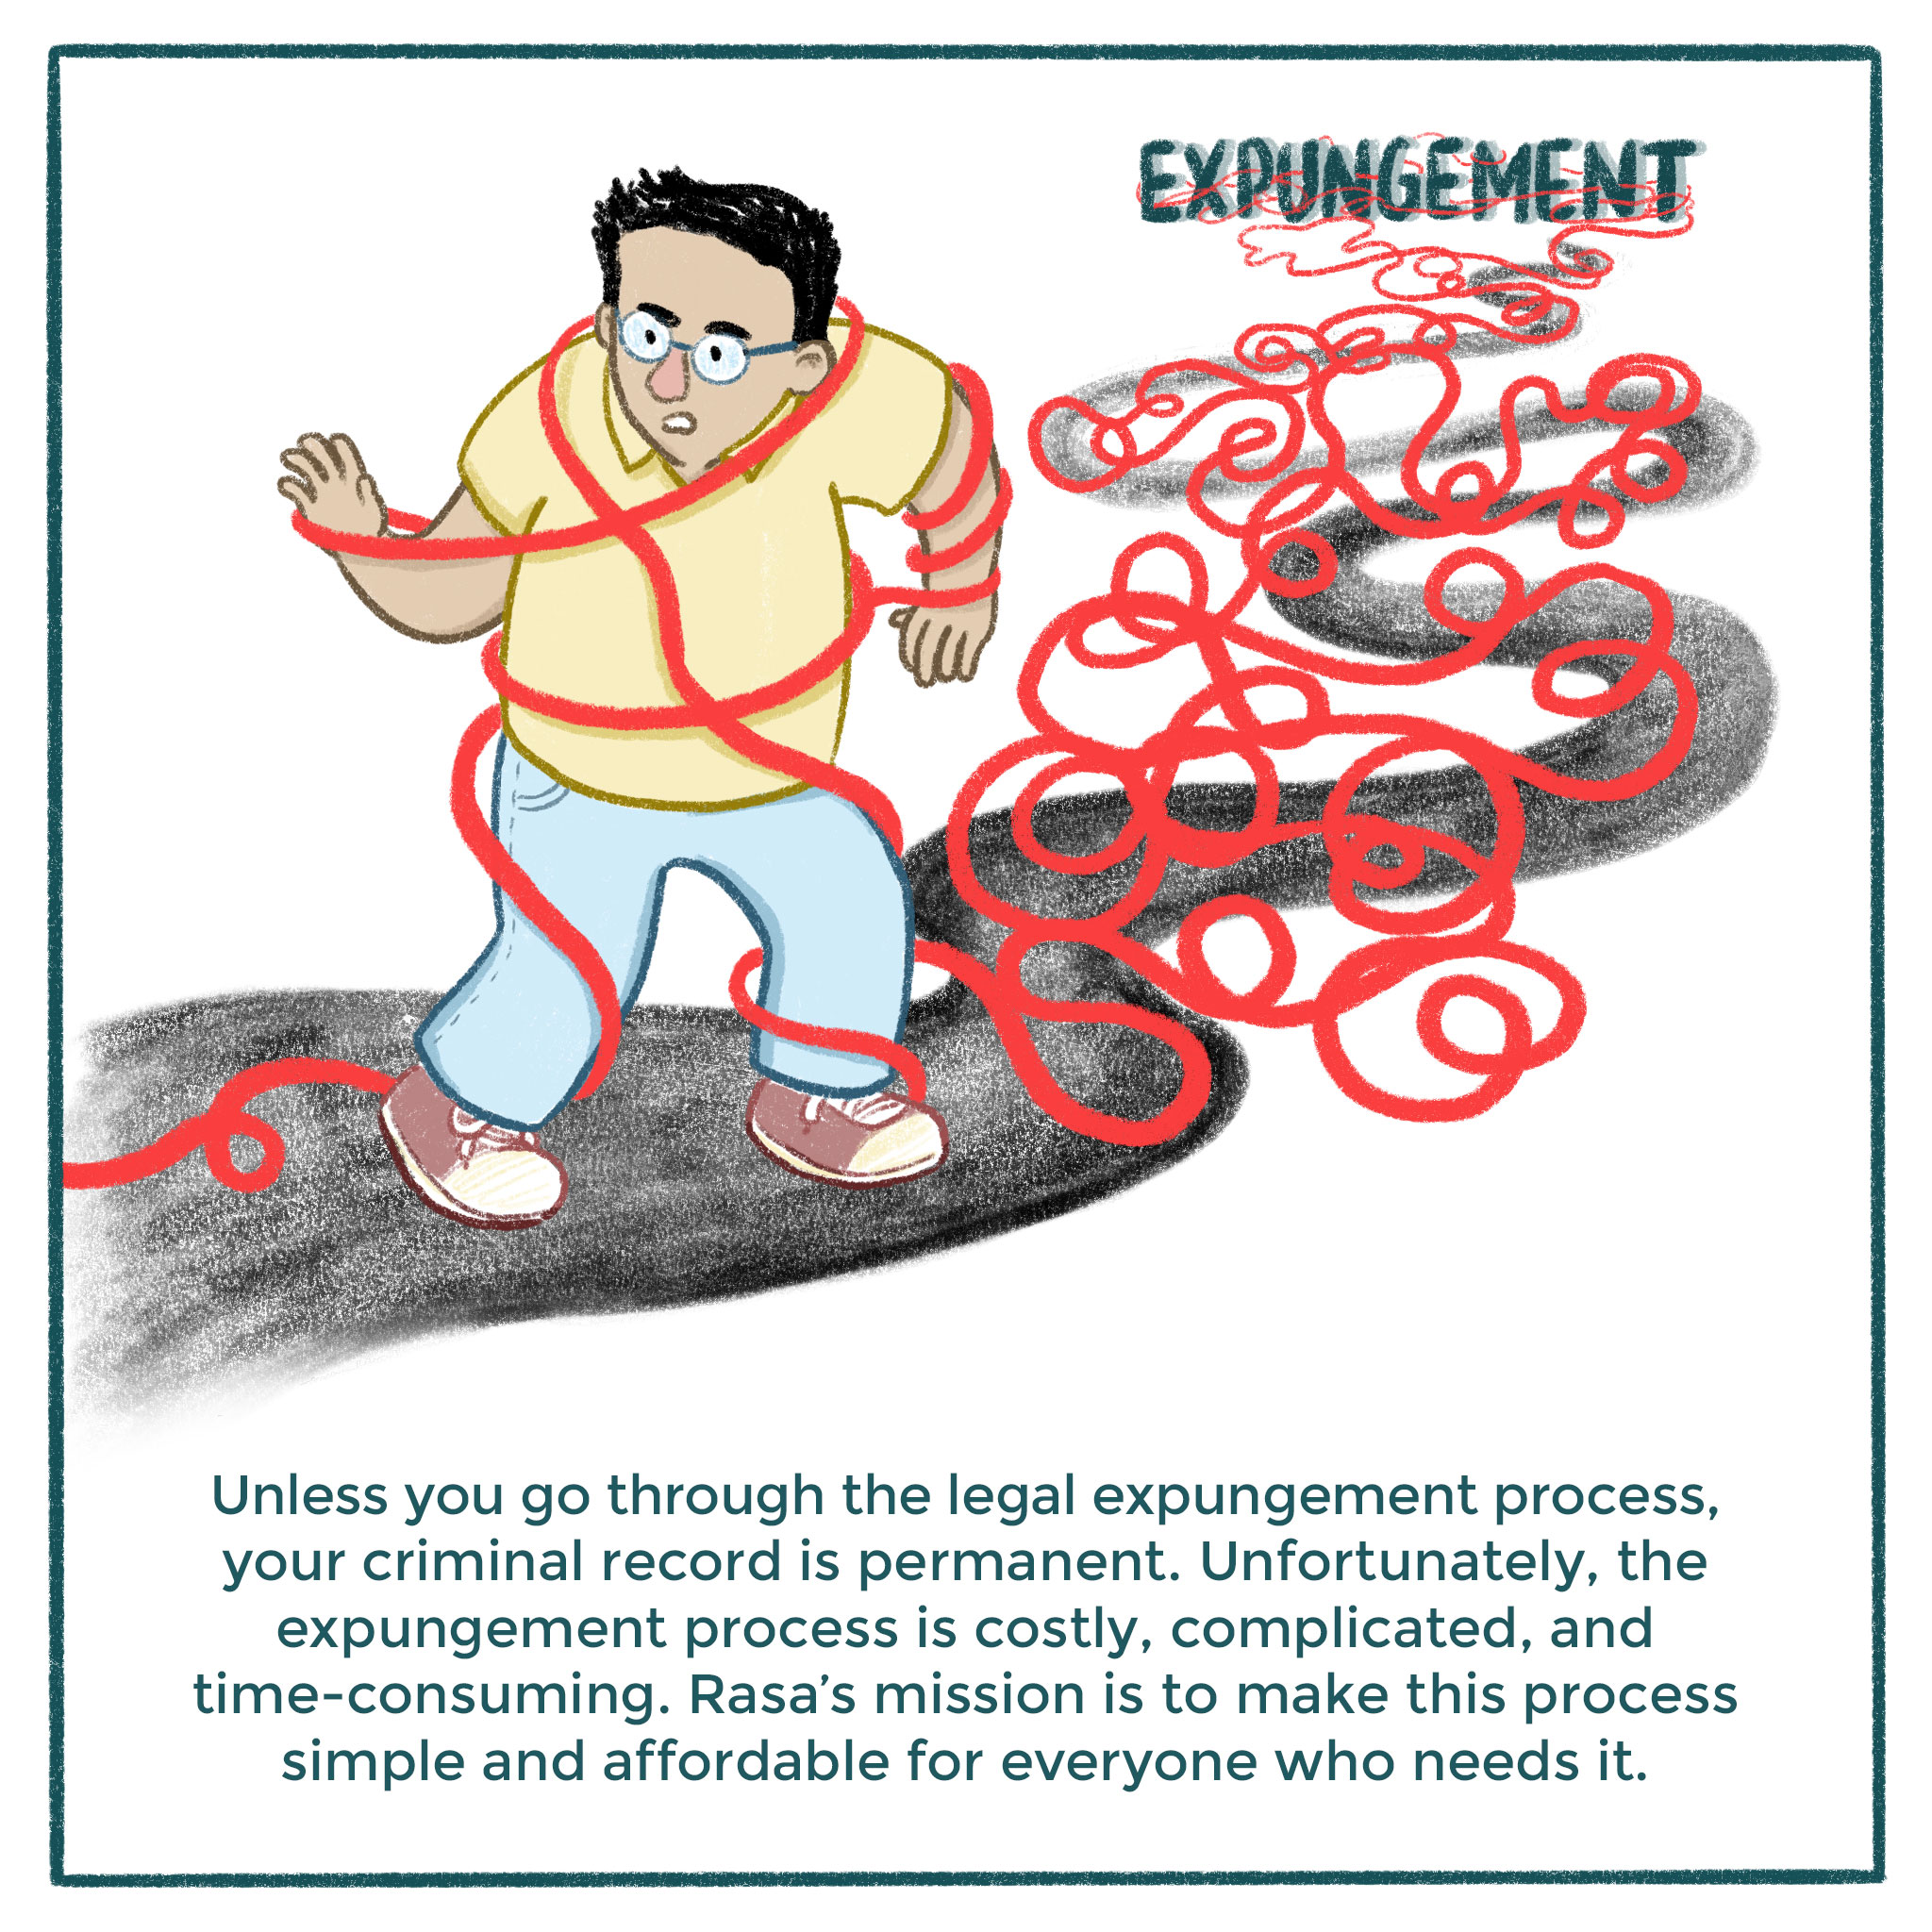 3. Image: Illustration of a man tied up in red tape. Text: Unless you go through the legal expungement process, your criminal record is permanent. Unfortunately, the expungement process in most states is costly, complicated, and time-consuming. Rasa’s mission is to make this process simple and affordable for everyone who needs it.